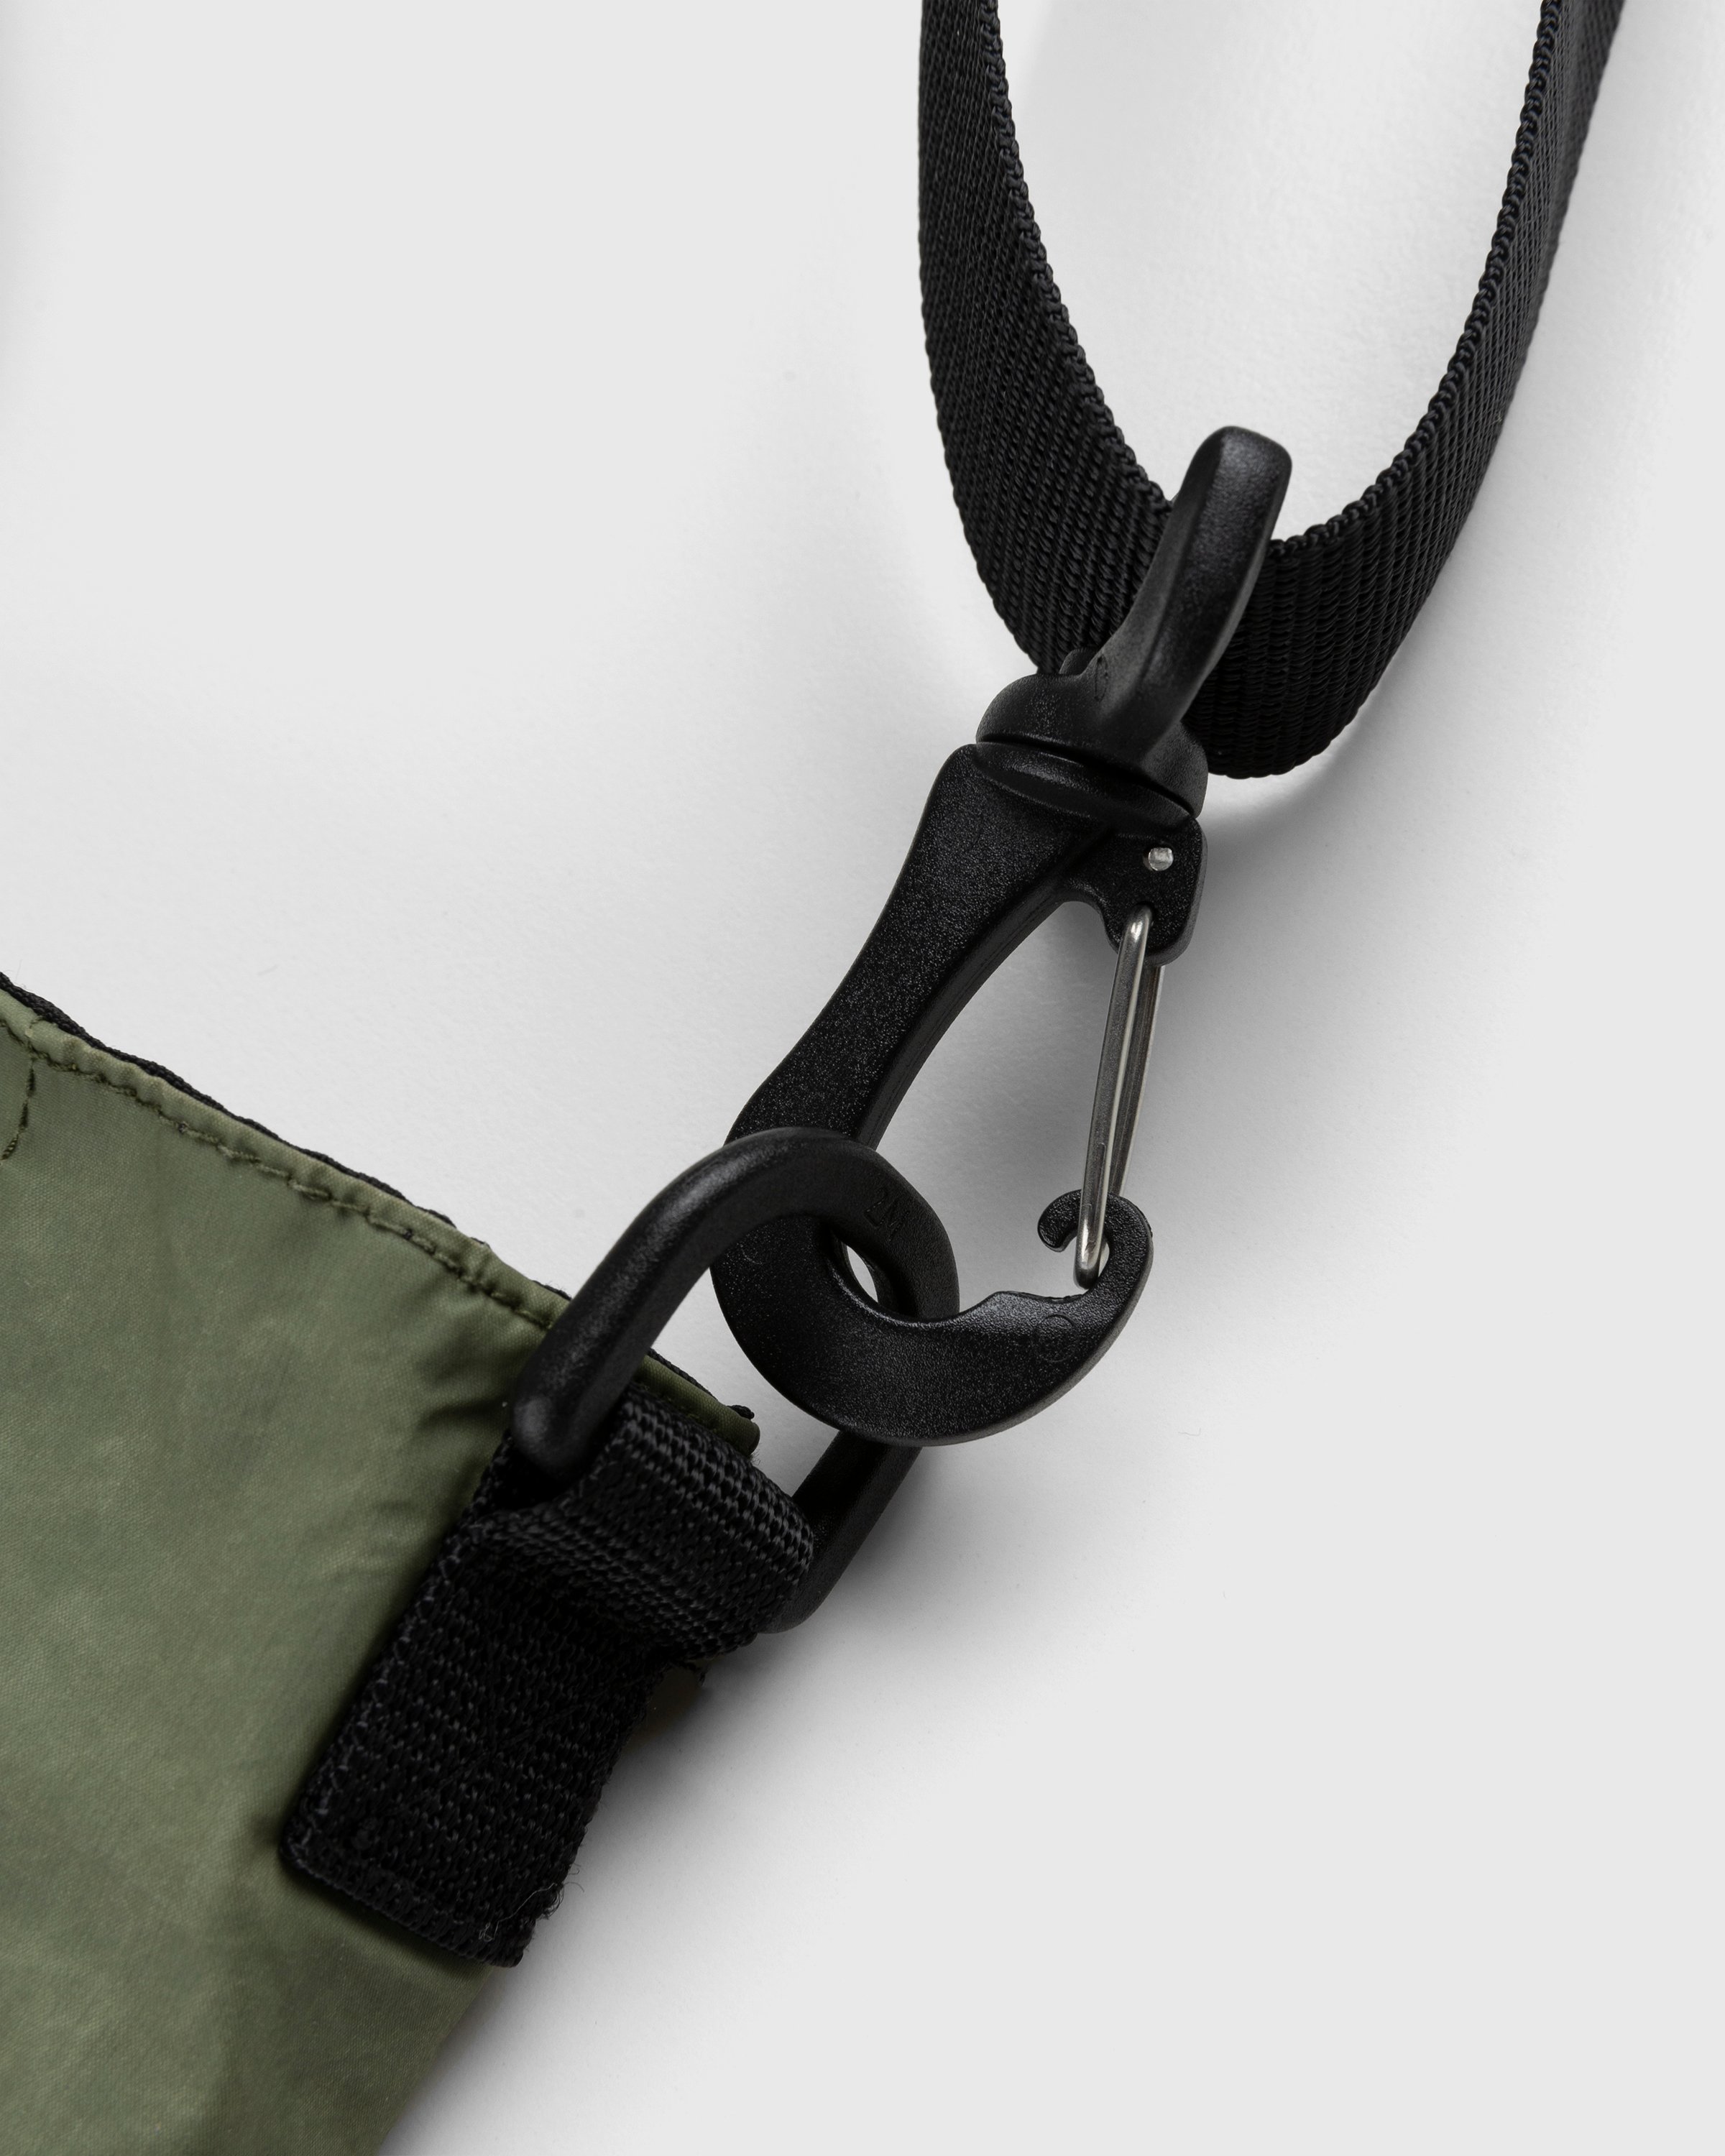 Stone Island - 91475 Garment-Dyed Tote Bag Olive - Accessories - Green - Image 3